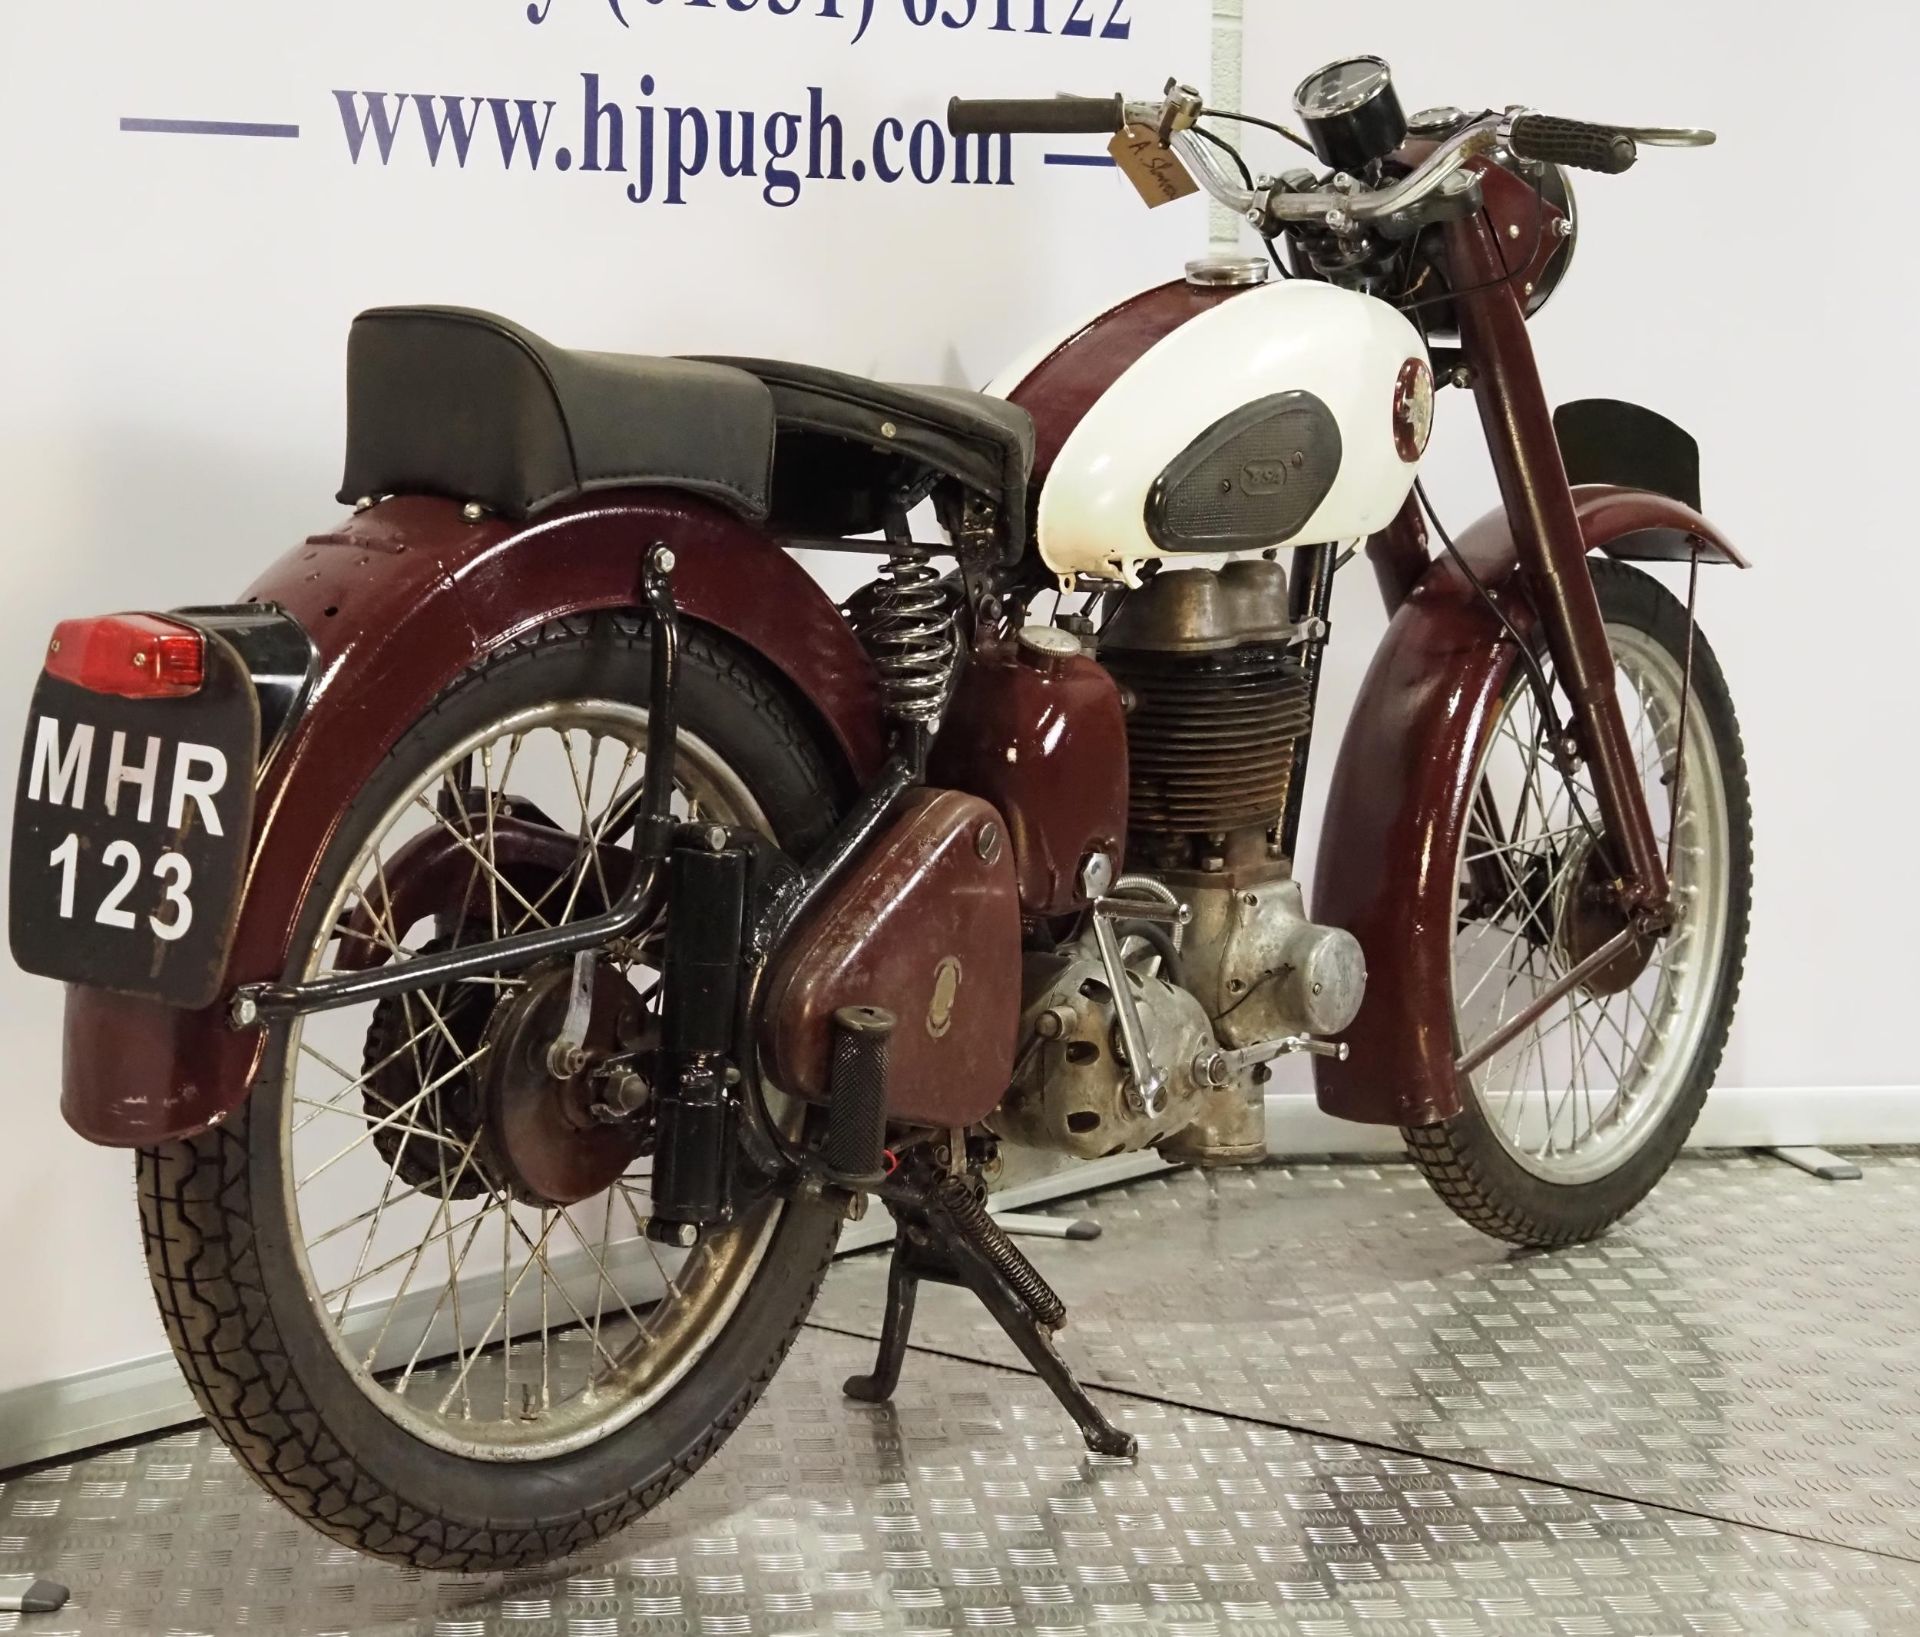 BSA C11G motorcycle project. 1955. 250cc. Frame No. BC11S 56721 Engine No. BC11G 23059. Does not - Image 3 of 6